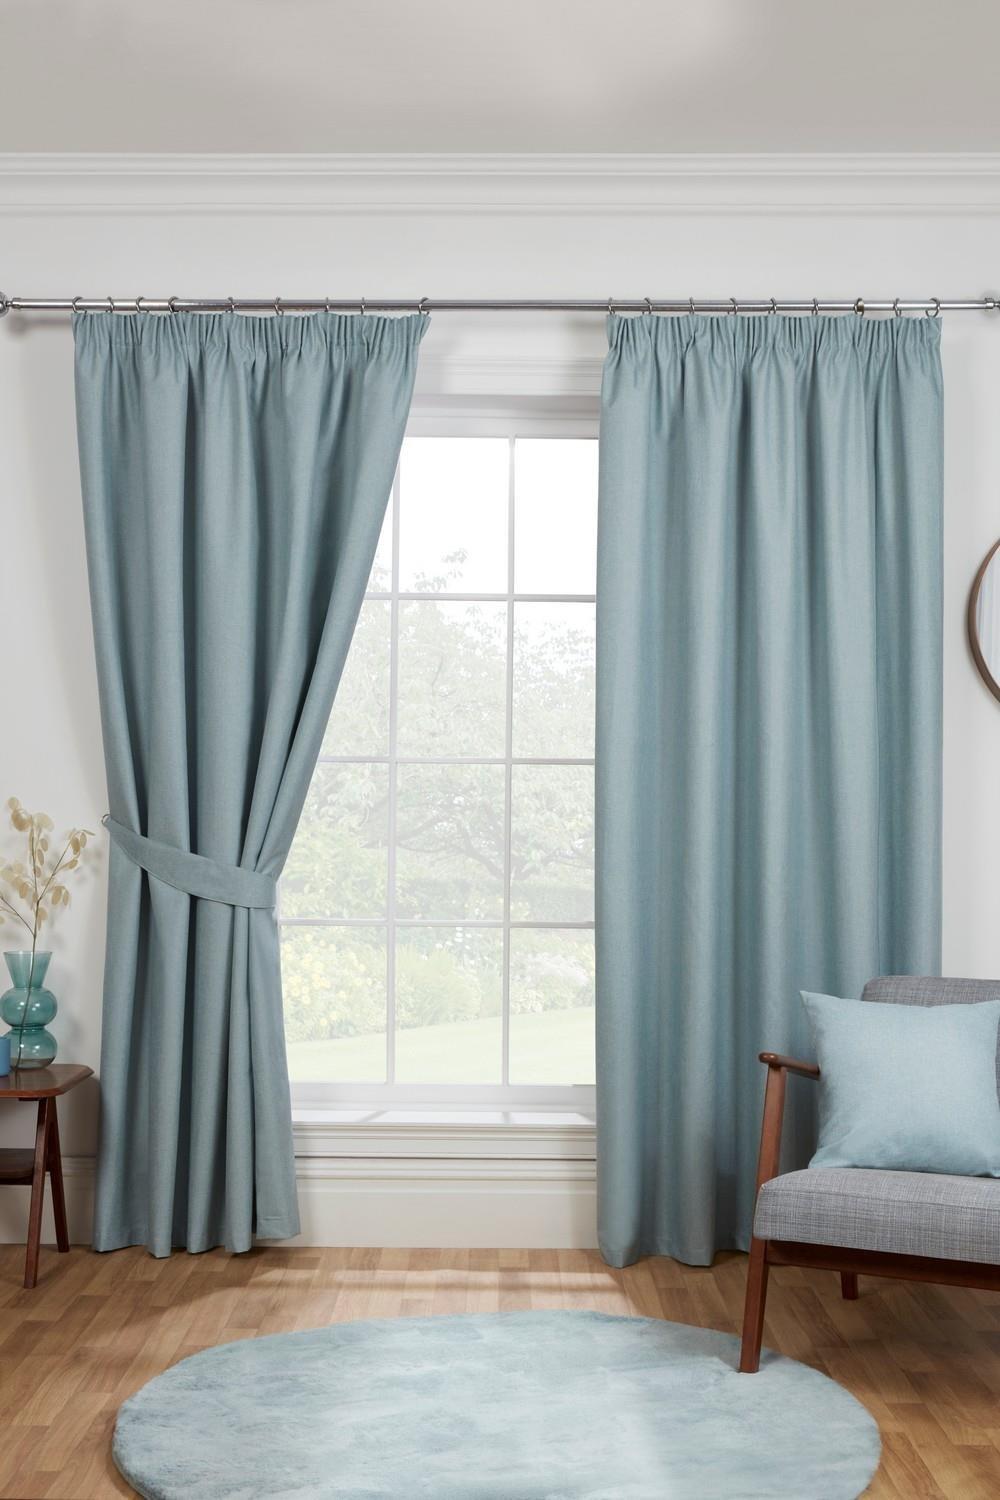 Eclipse Pencil Pleat Blackout Curtains Taped Curtain Pair